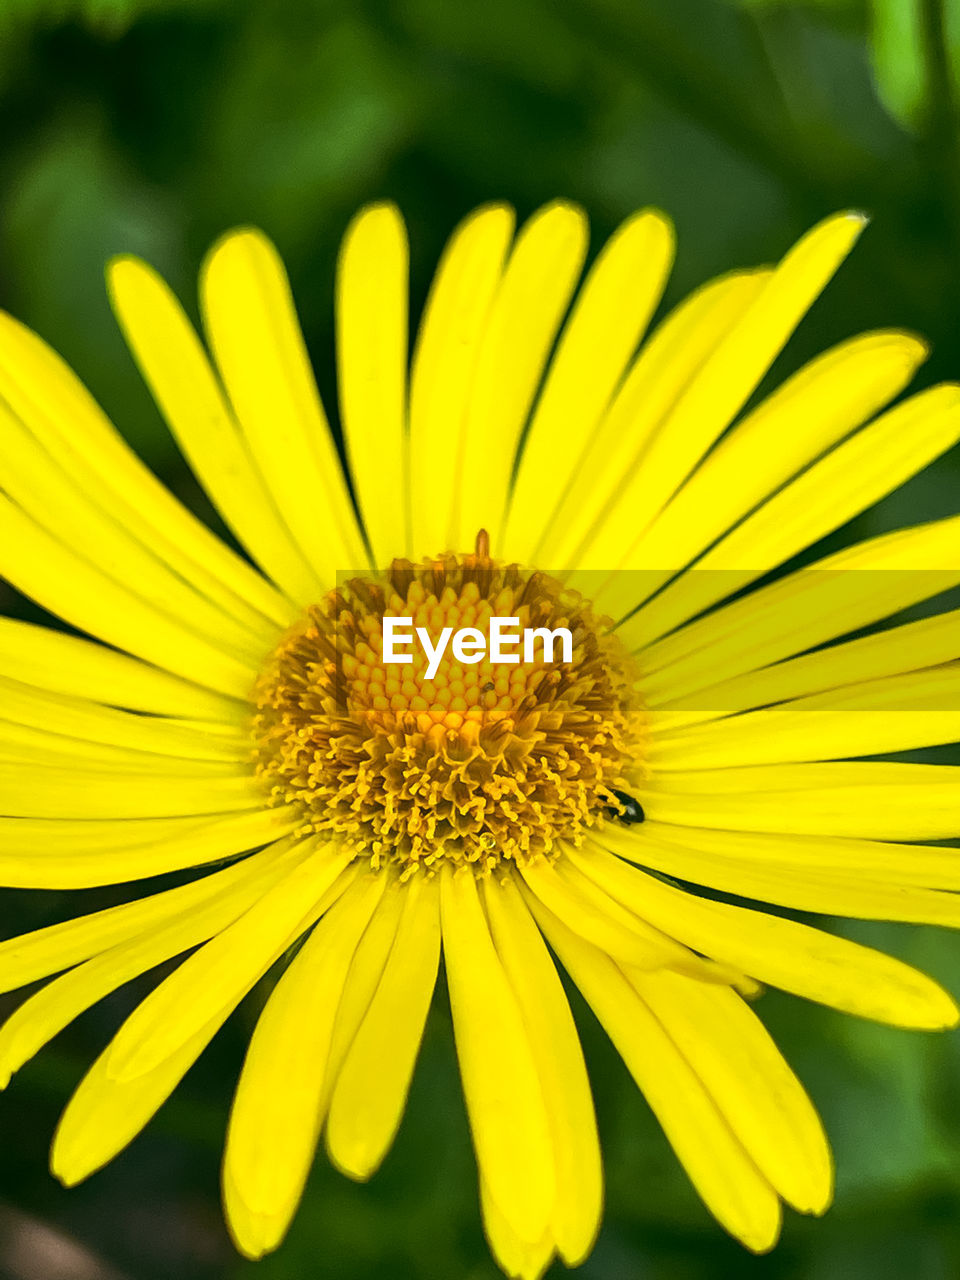 flower, flowering plant, plant, freshness, yellow, beauty in nature, flower head, growth, close-up, fragility, petal, inflorescence, nature, macro photography, pollen, no people, daisy, focus on foreground, summer, botany, outdoors, vibrant color, springtime, macro, blossom, selective focus, day, wildflower